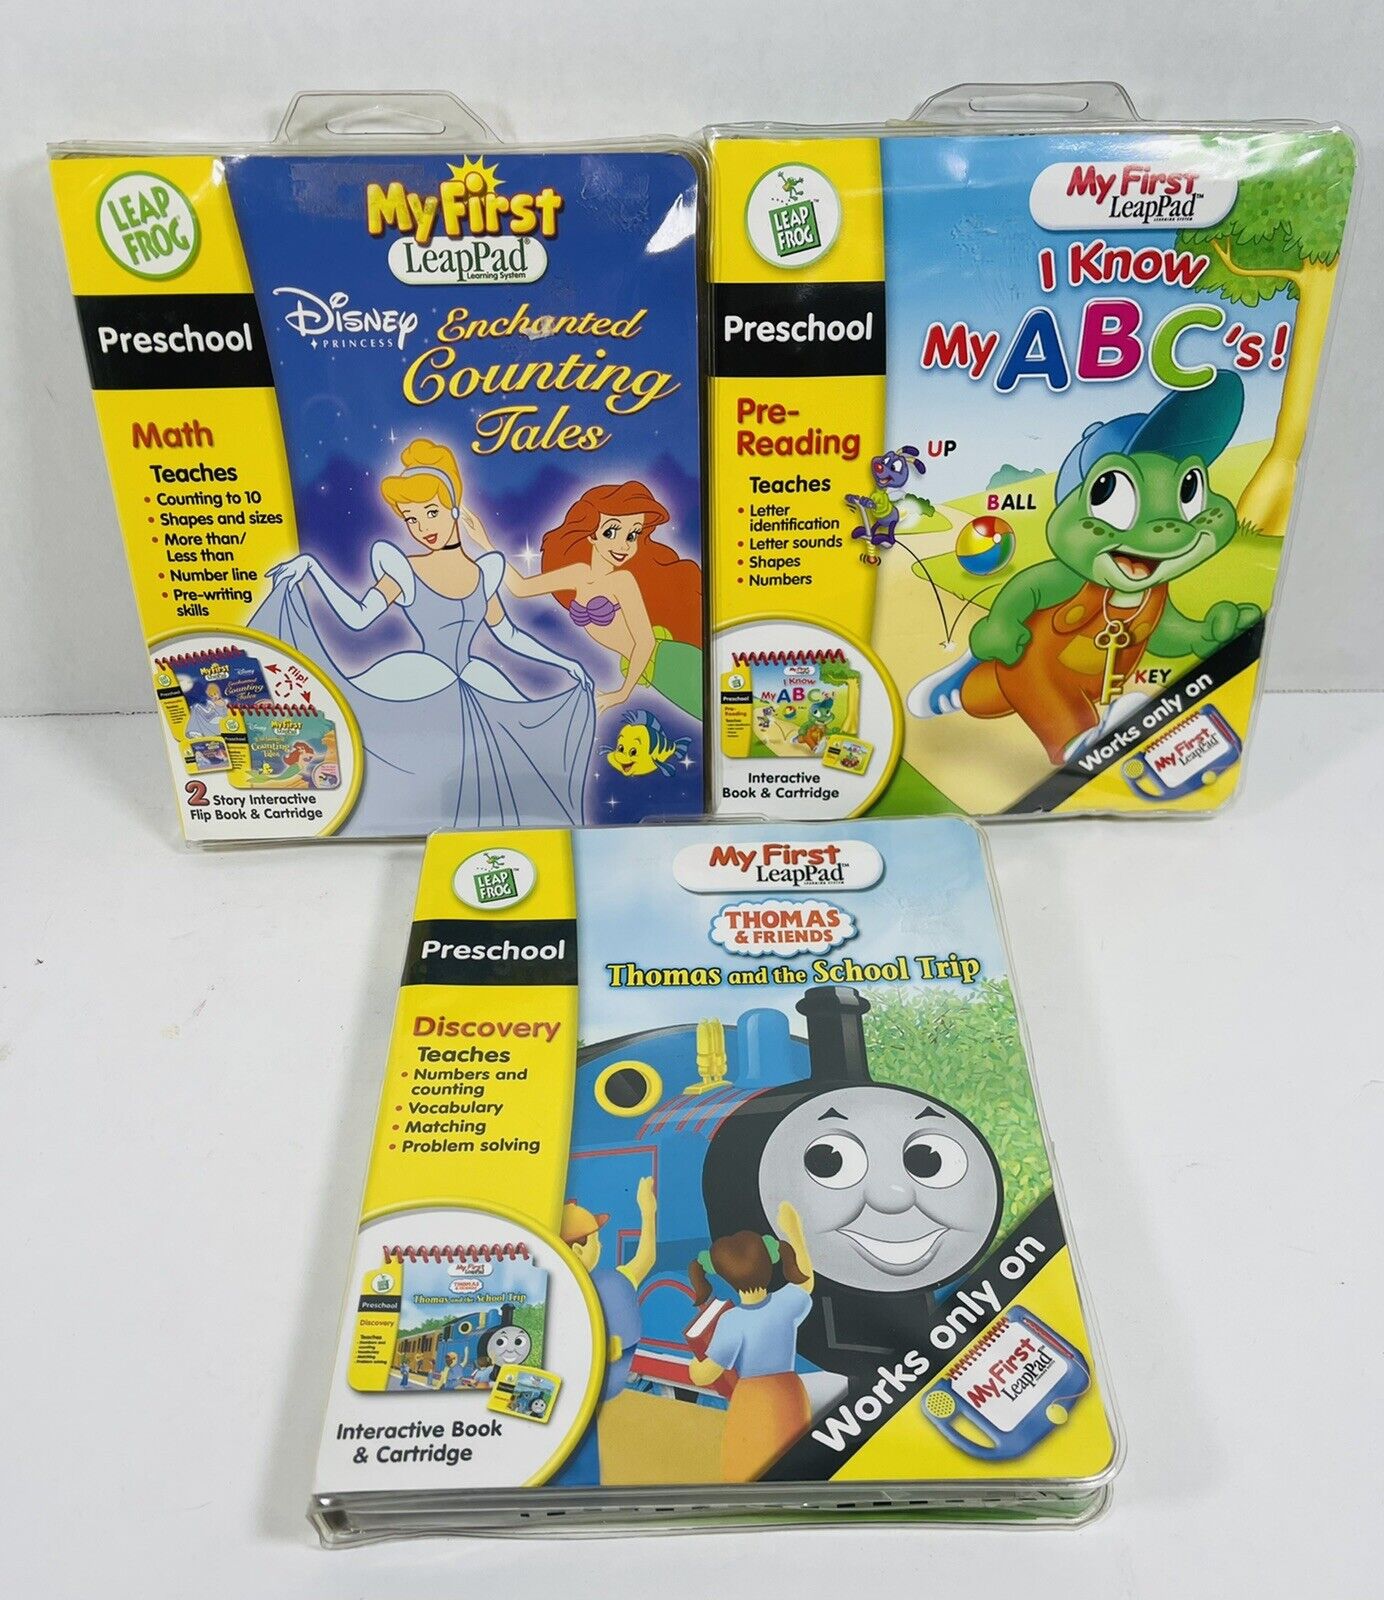 4 - My First LeapFrog book and cartridge Preschool Math Pre-Reading Discovery